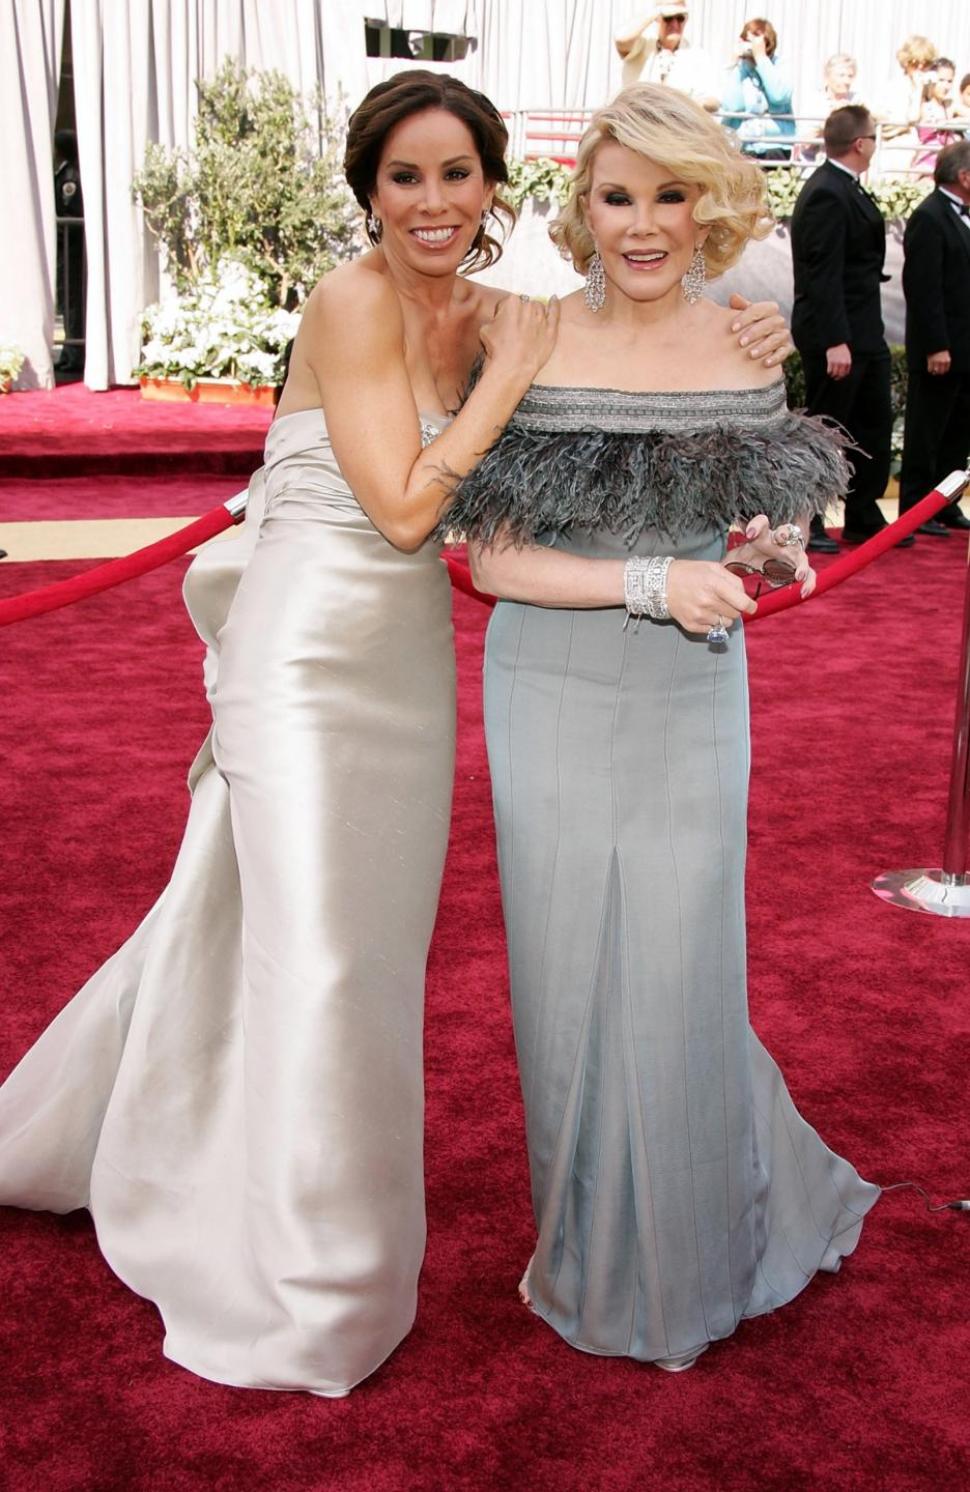 Joan Rivers with daughter Melissa on the red carpet at the Academy Awards in 2006.